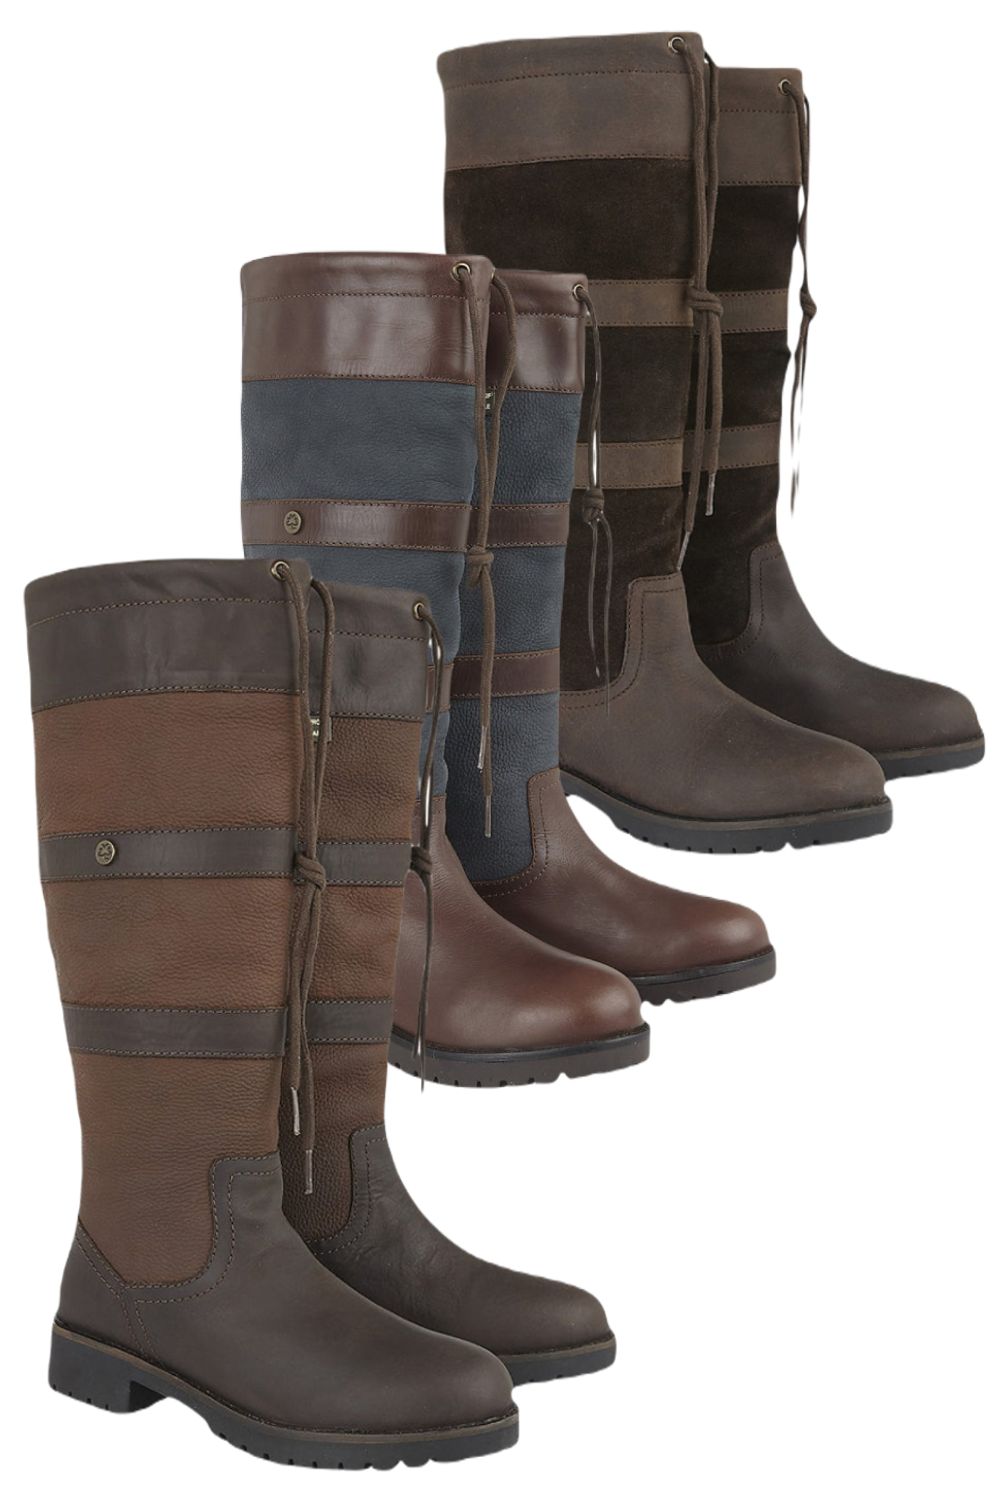 Cabotswood Amberley Country Boots Chestnut/Navy Oak/Bison Oak/Chocolate 